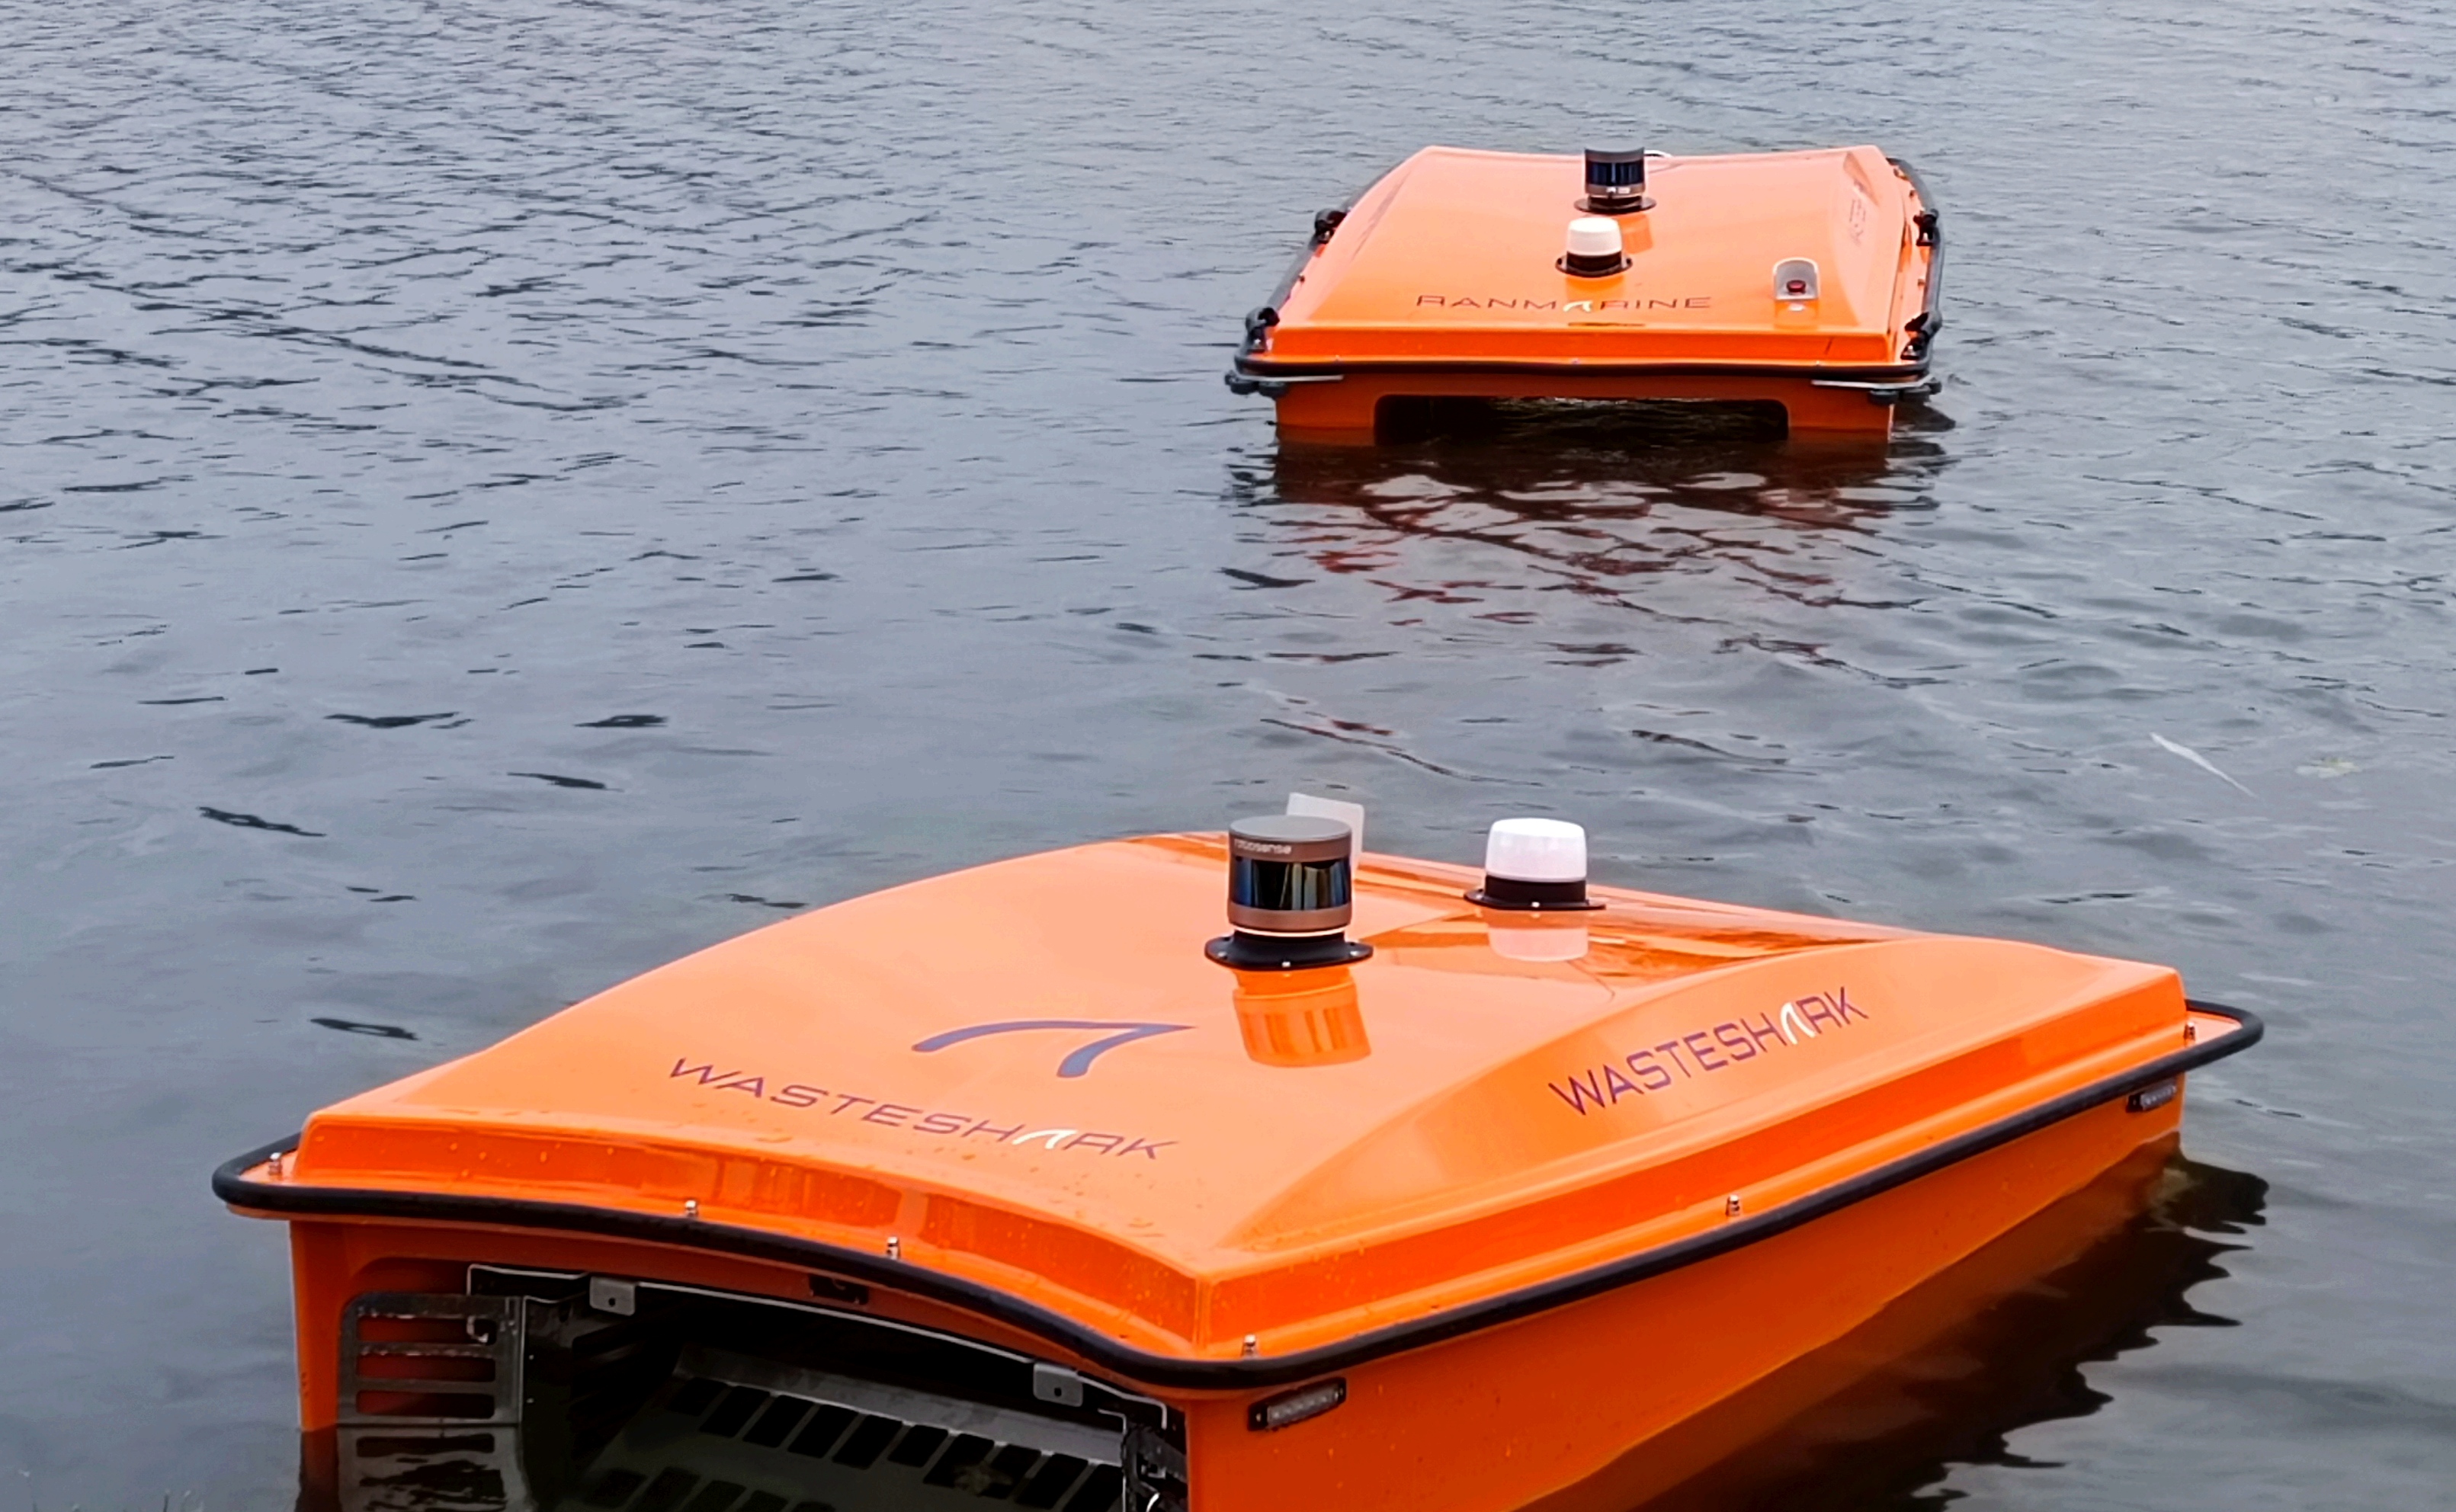 WasteShark by RanMarine: The world’s first autonomous aquadrone that cleans pollution from waterways and collects data about water quality.